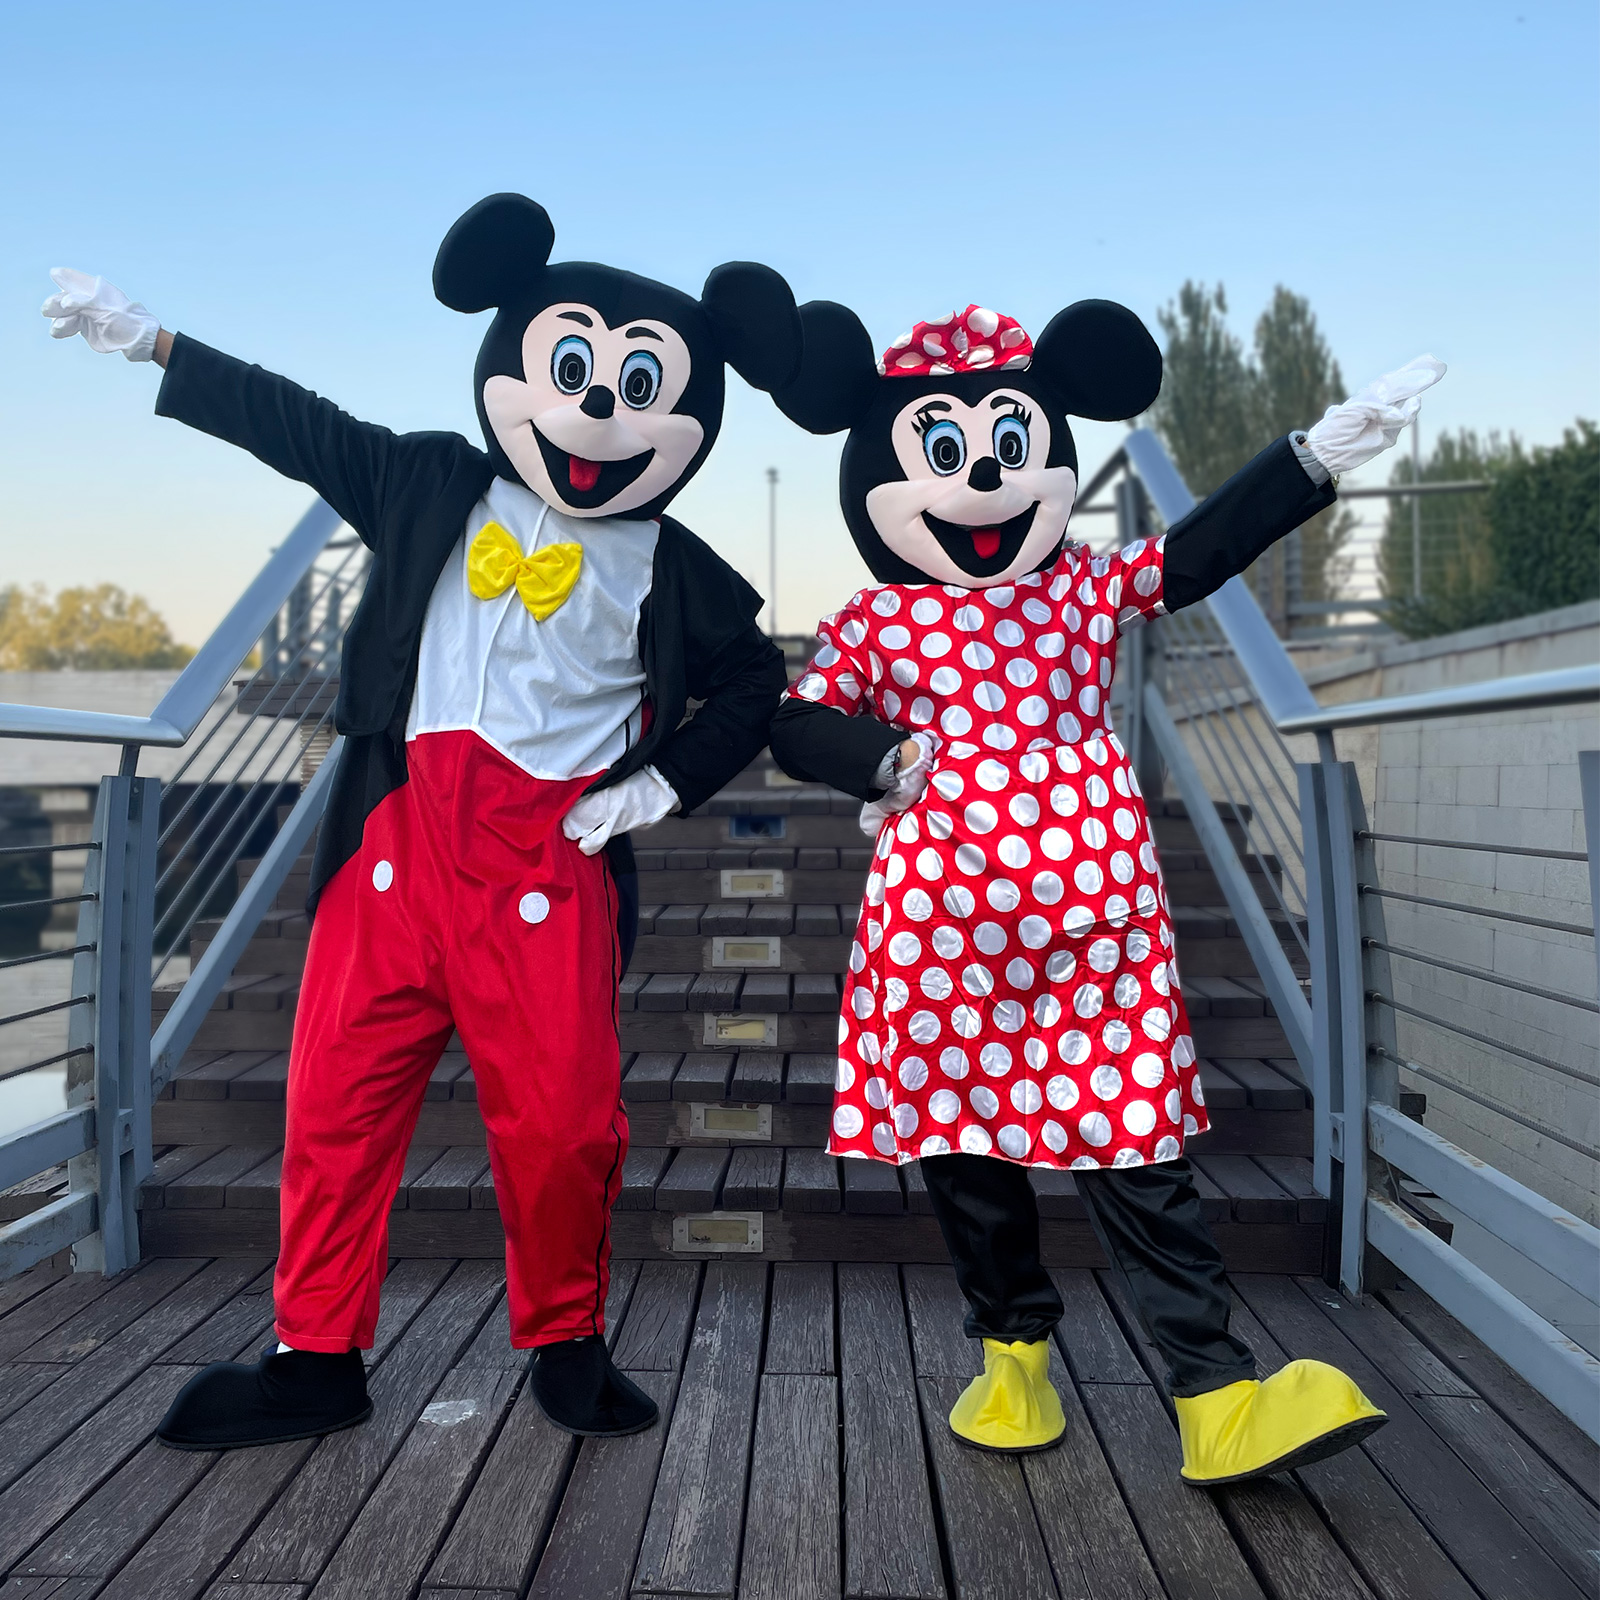 Classic Mascot Costume Compatible with Mickey and Minnie Mouse Adult Size for Men & Women Birthday Party - image 3 of 5